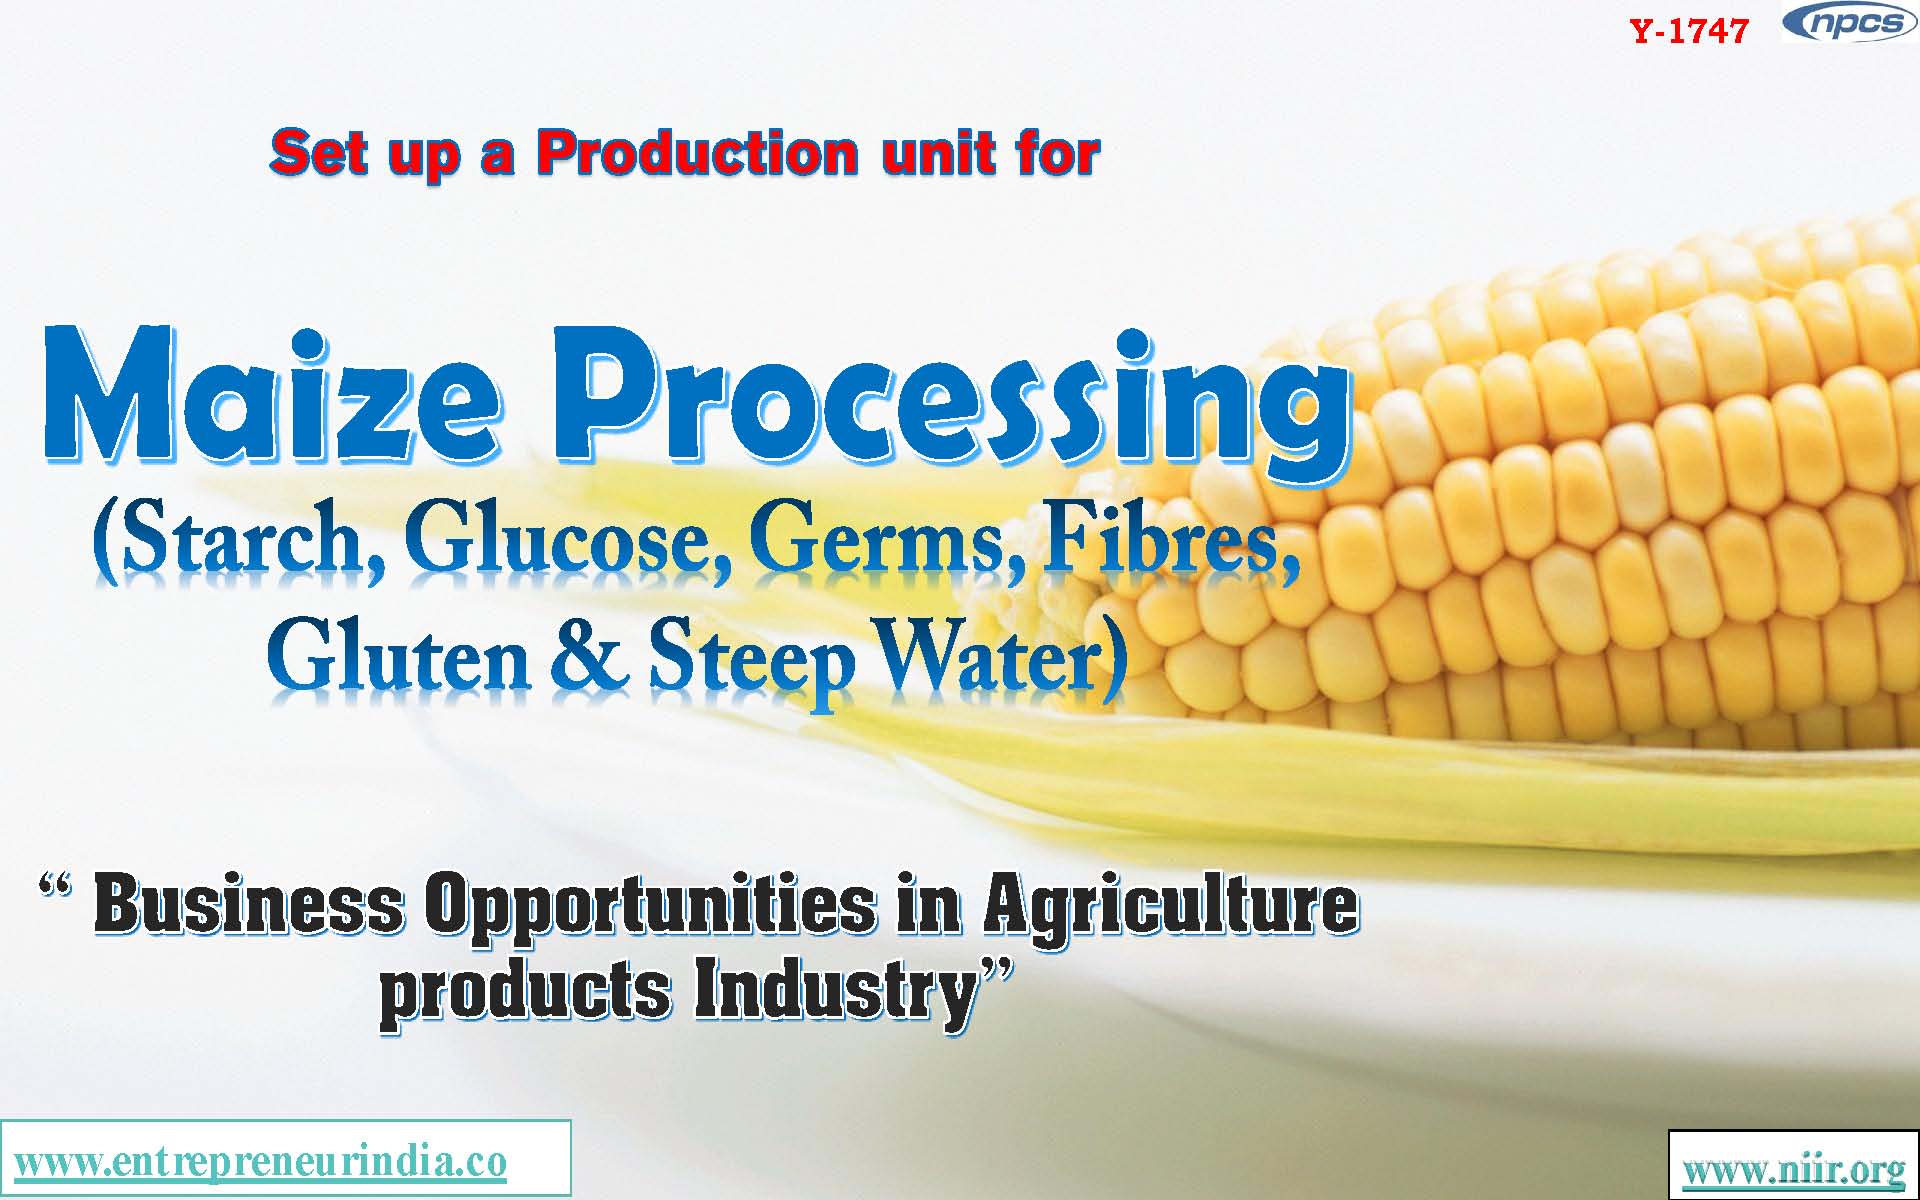 Set up a Production unit for Maize Processing Starch, Glucose, Germs, Fibres, Gluten and Steep Water Business Opportunities in Agriculture products Industry